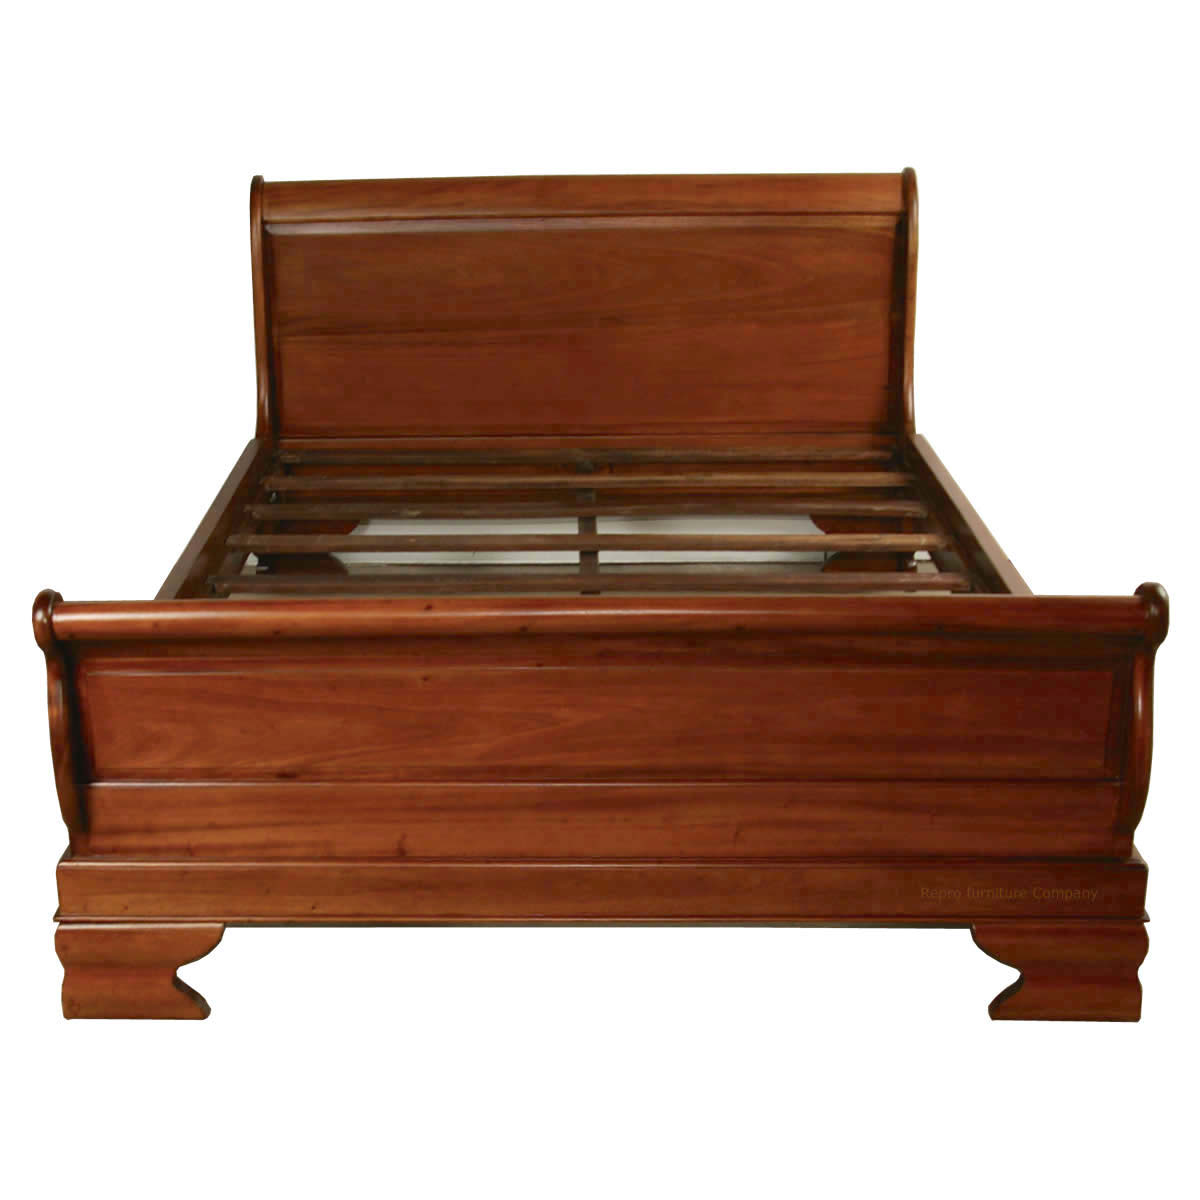 King Size Mahogany Sleigh Bed Repro, King Size Bed Frame Sleigh Bed